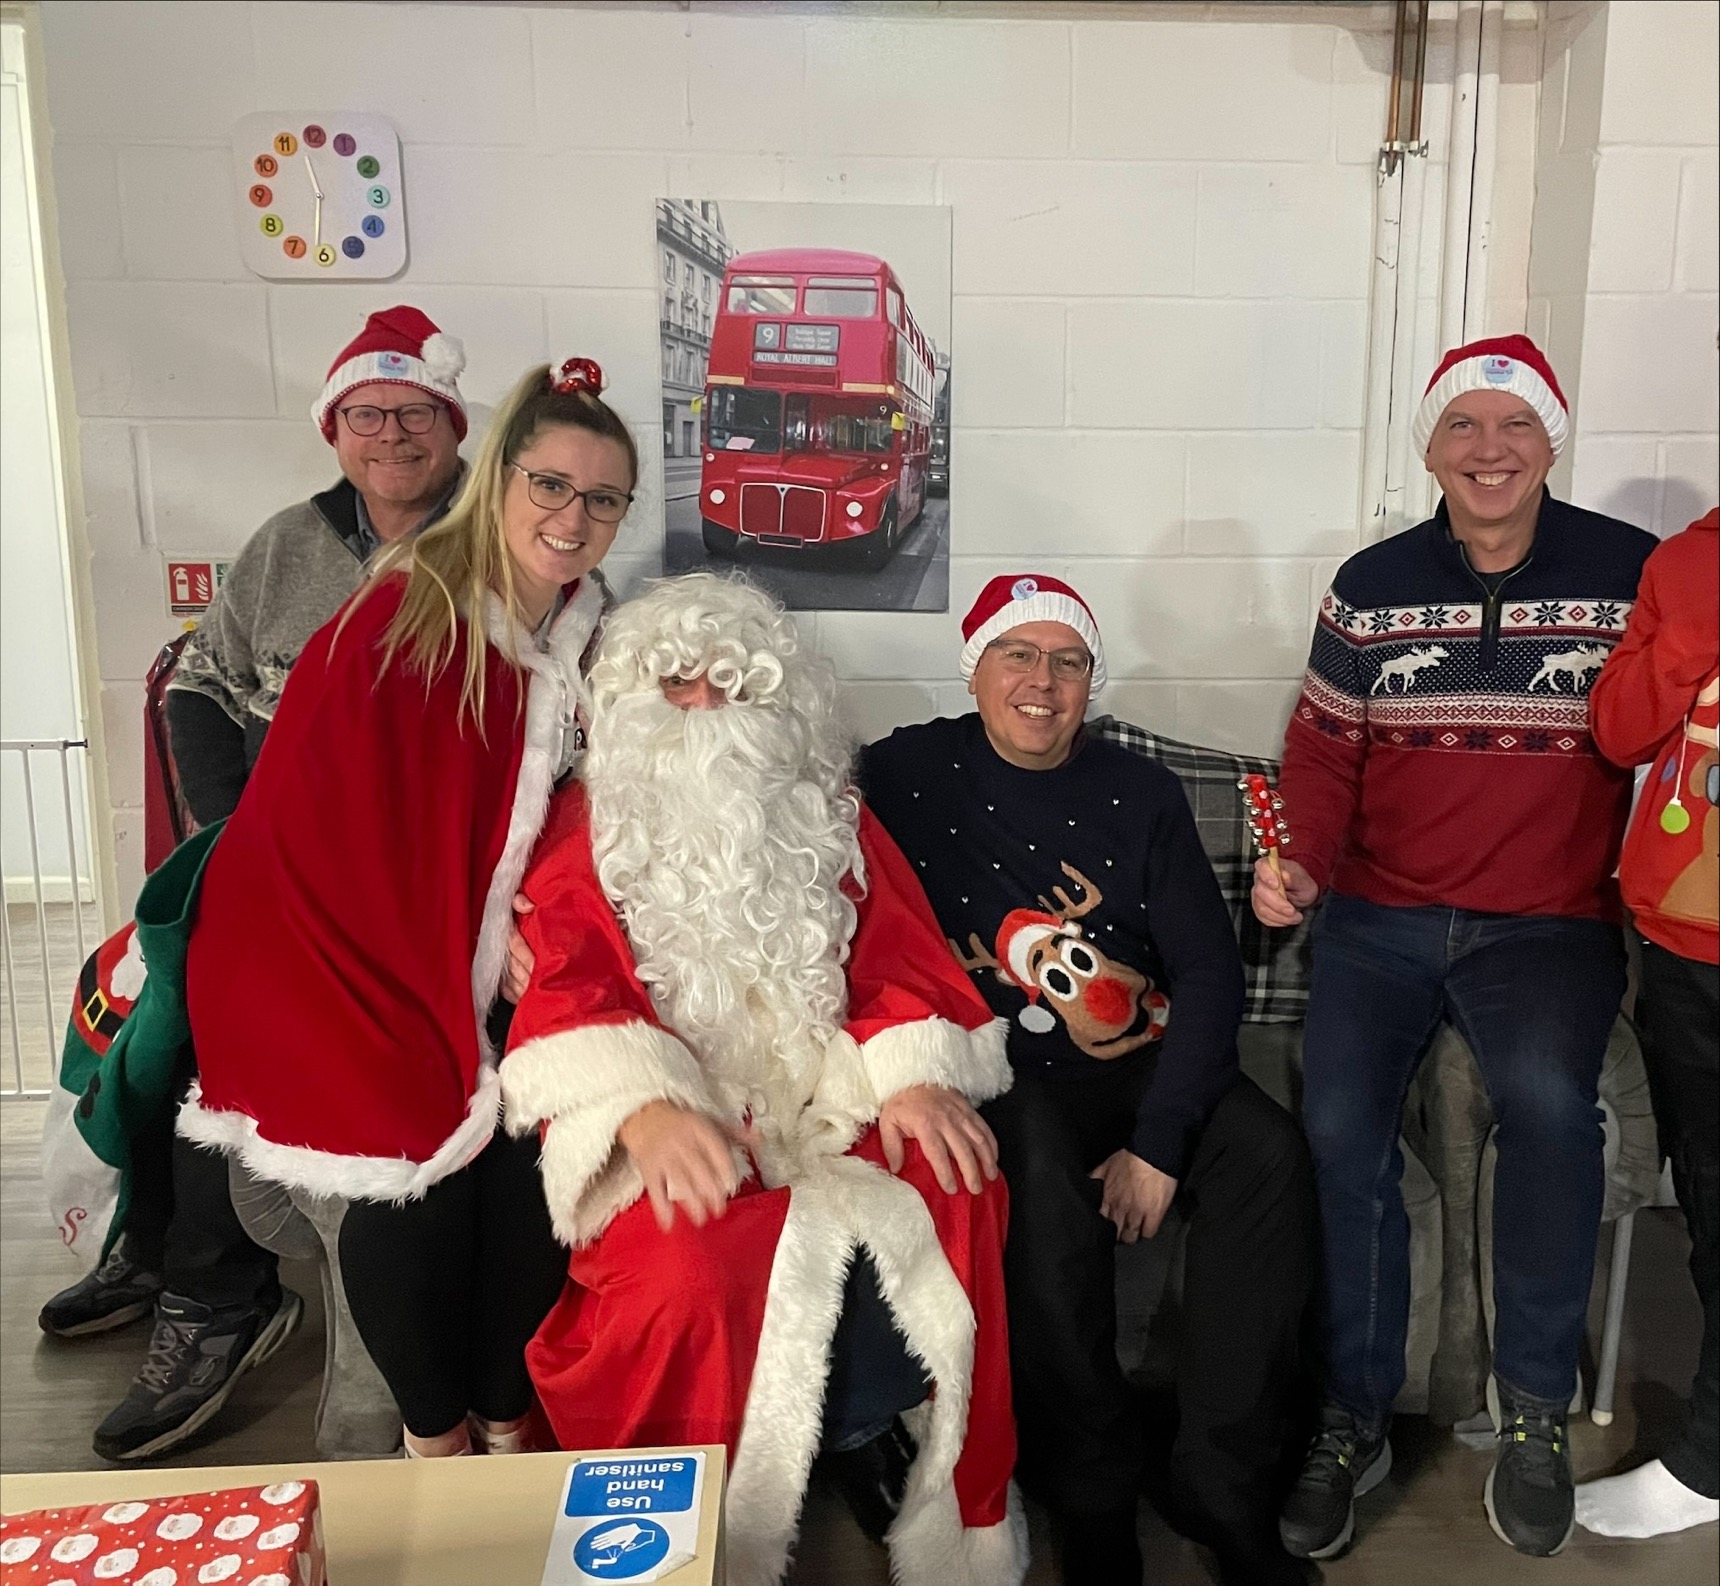 The Fostering Together team meet Santa!